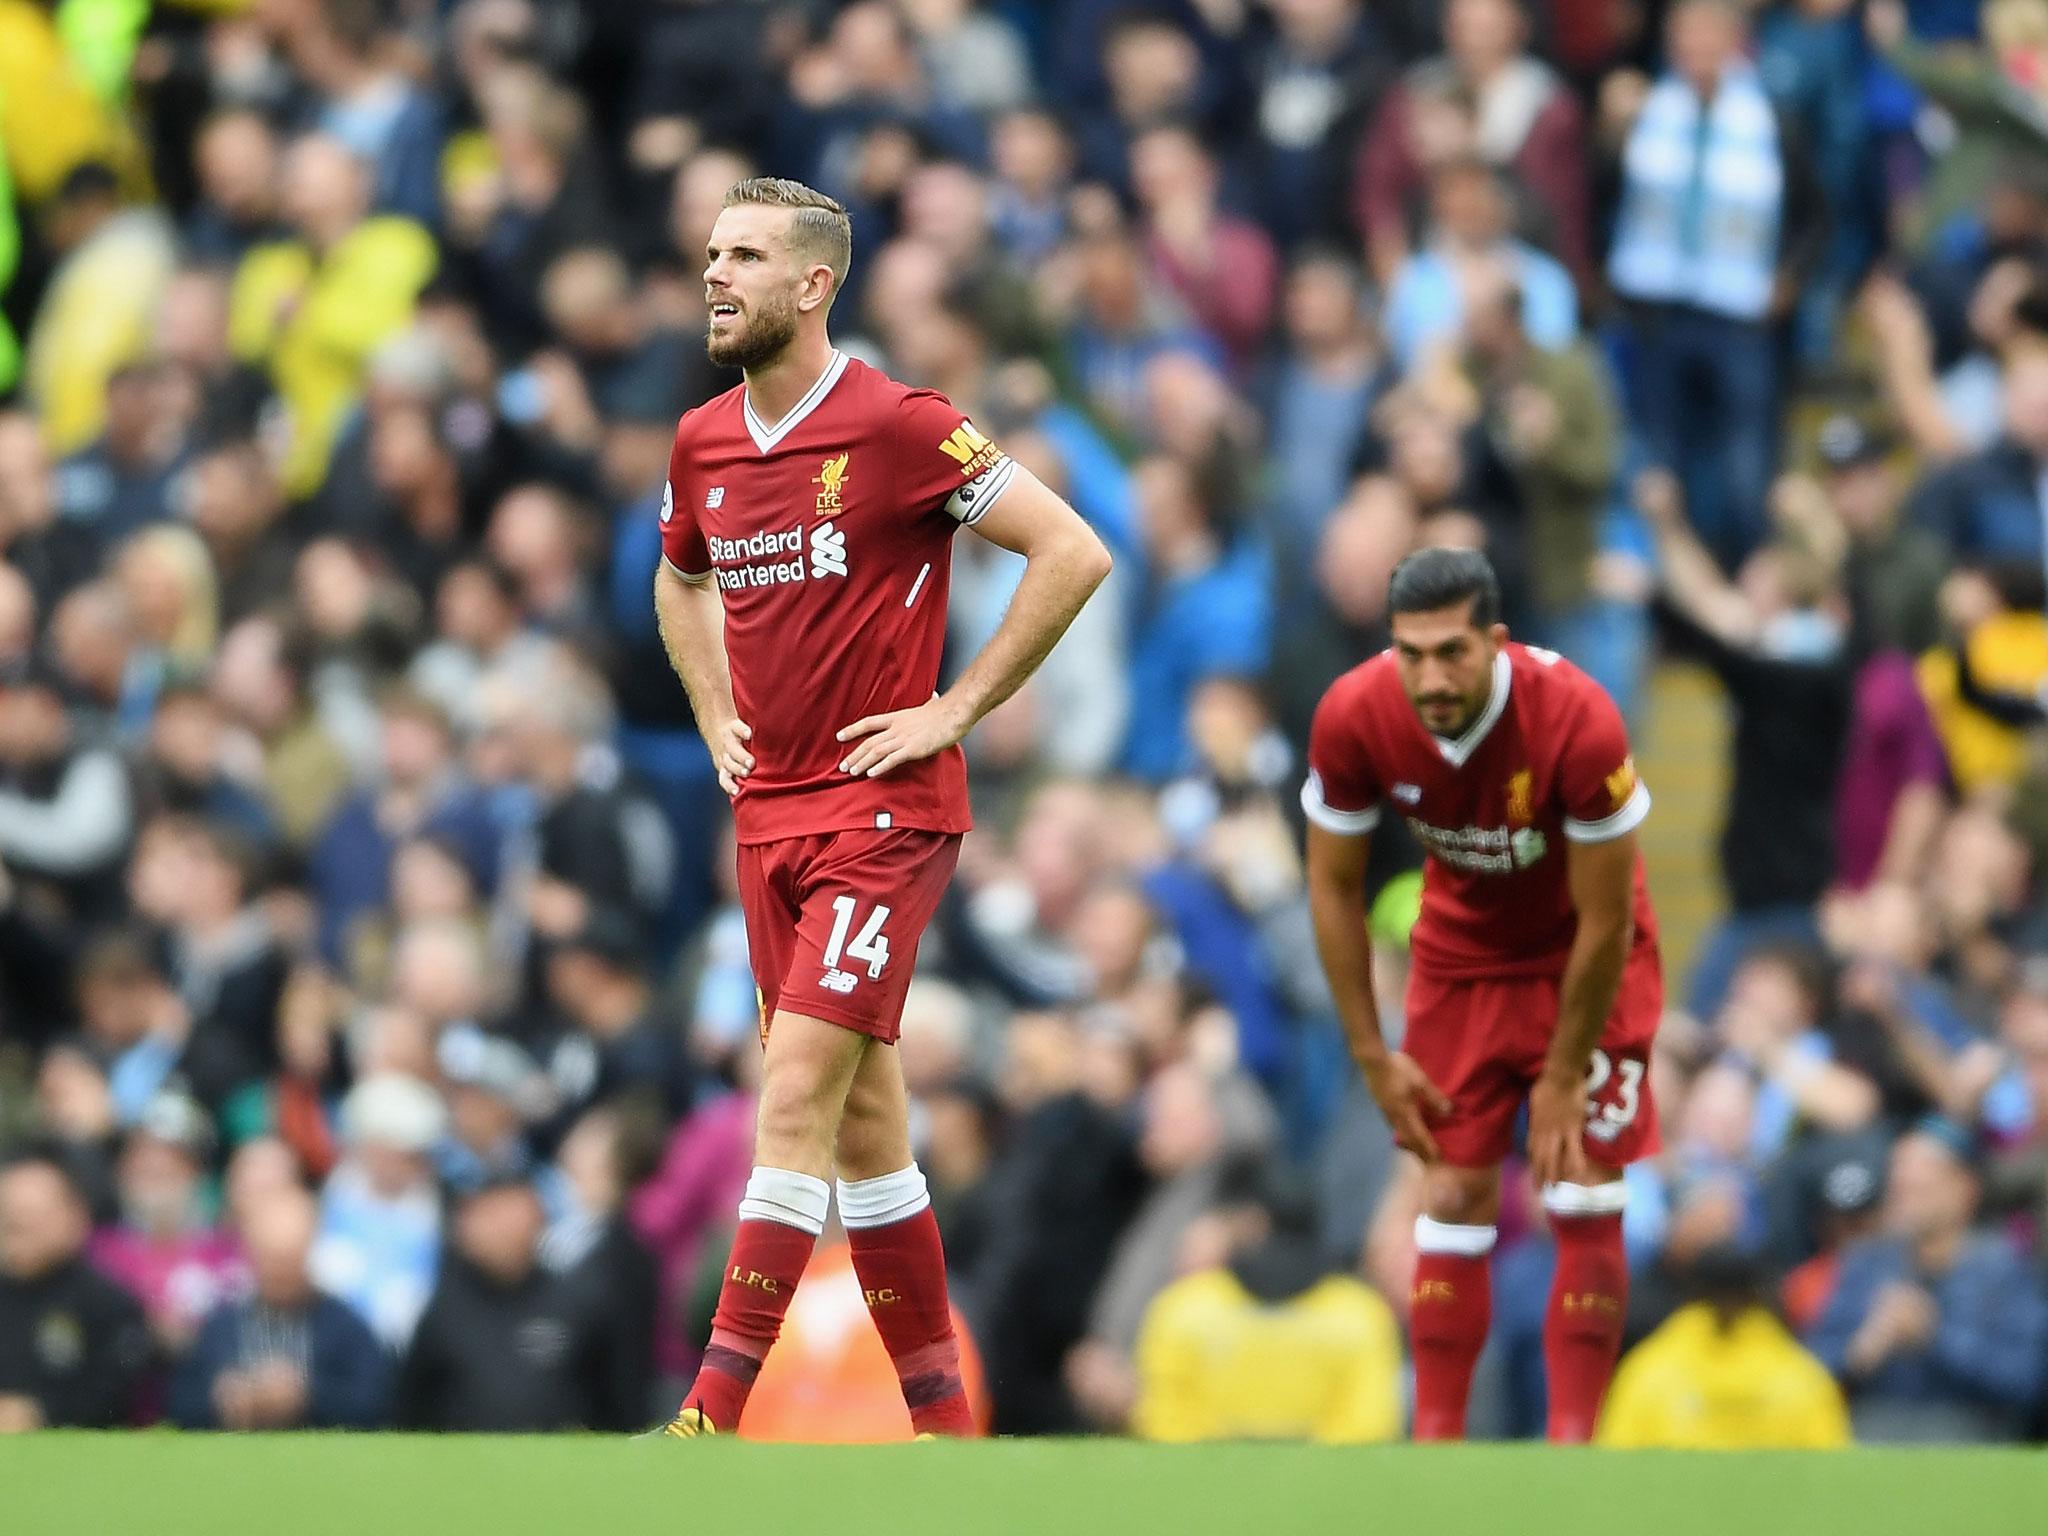 Liverpool's midfield put in a below-par performance against City